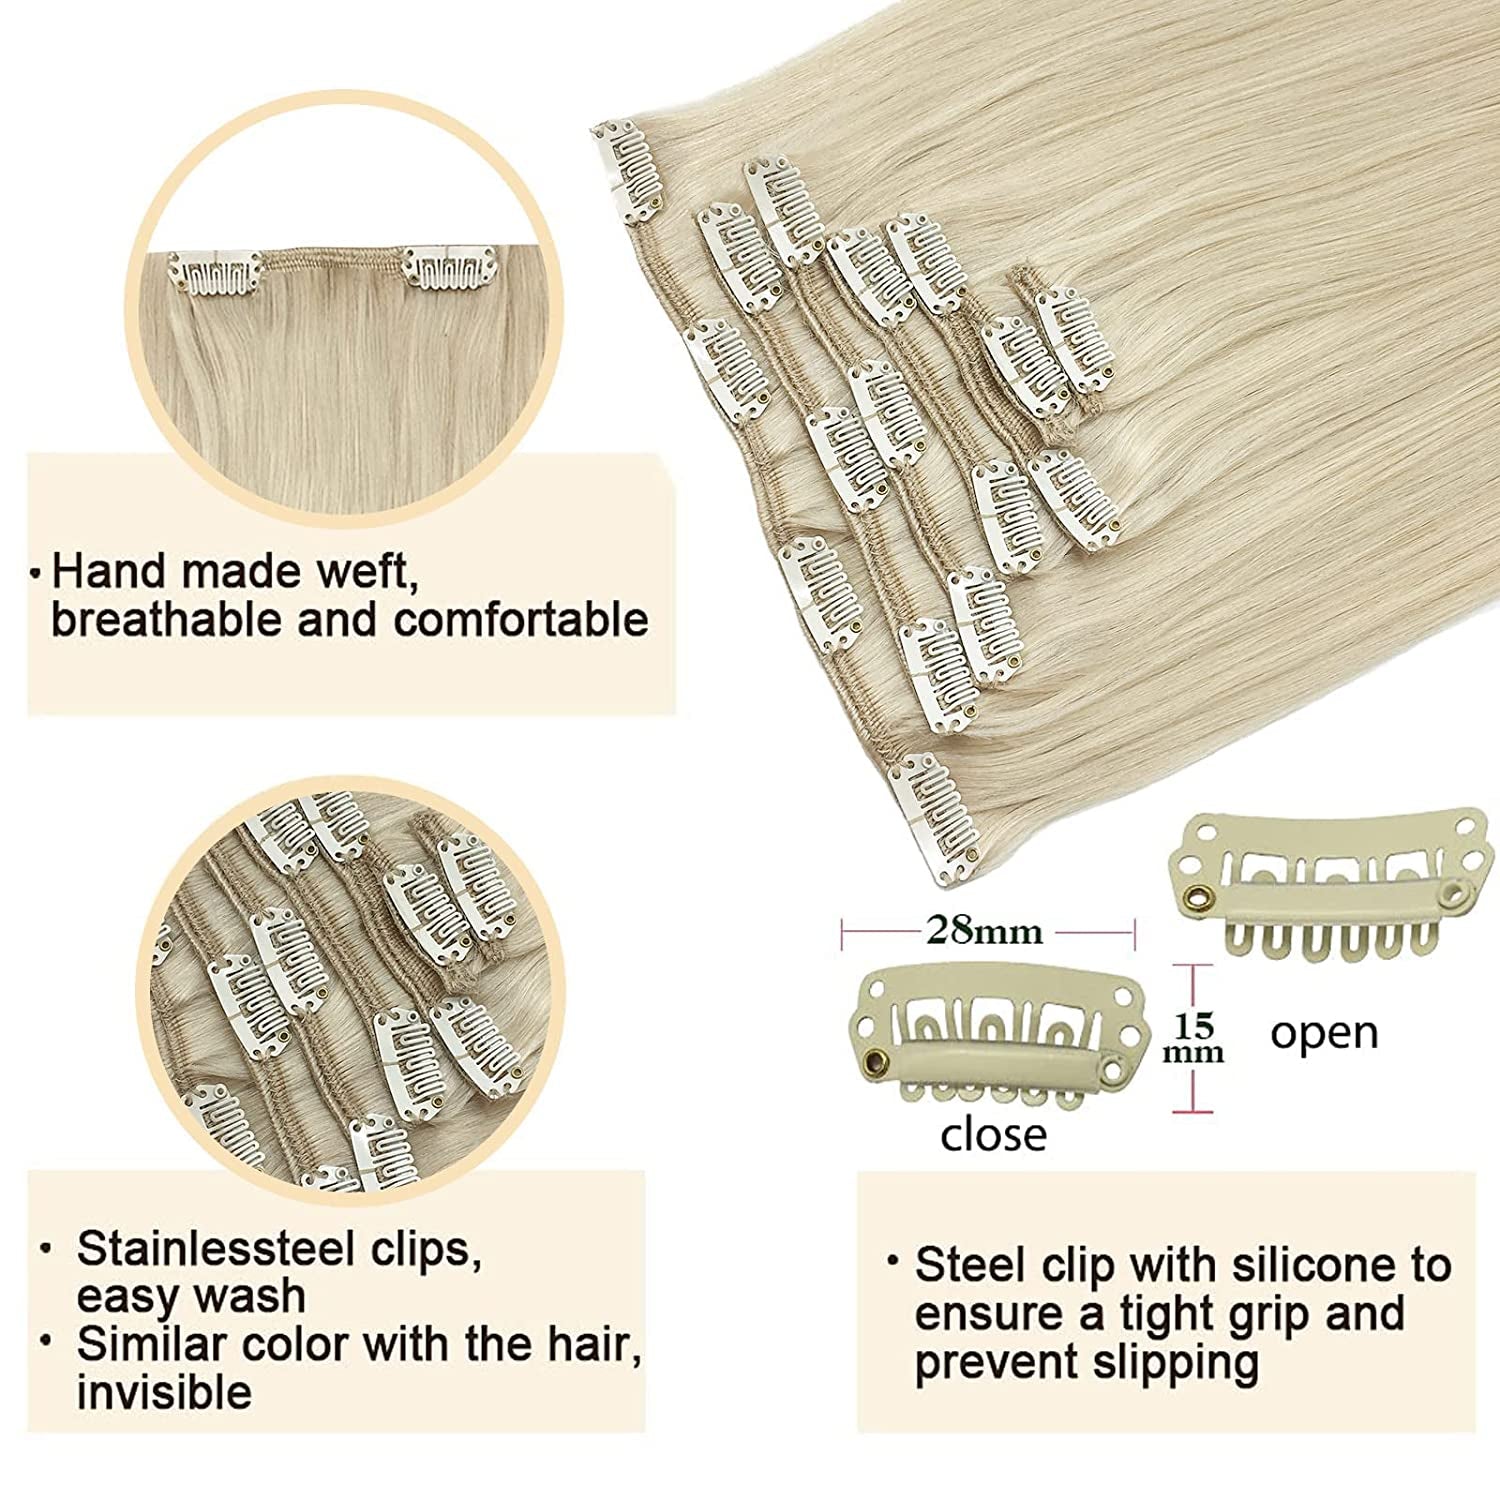 GOO GOO Clip-In Hair Extensions for Women, Soft & Natural, Handmade Real Human Hair Extensions, Platinum Blonde, Long, Straight #60A, 7Pcs 120G 20 Inches